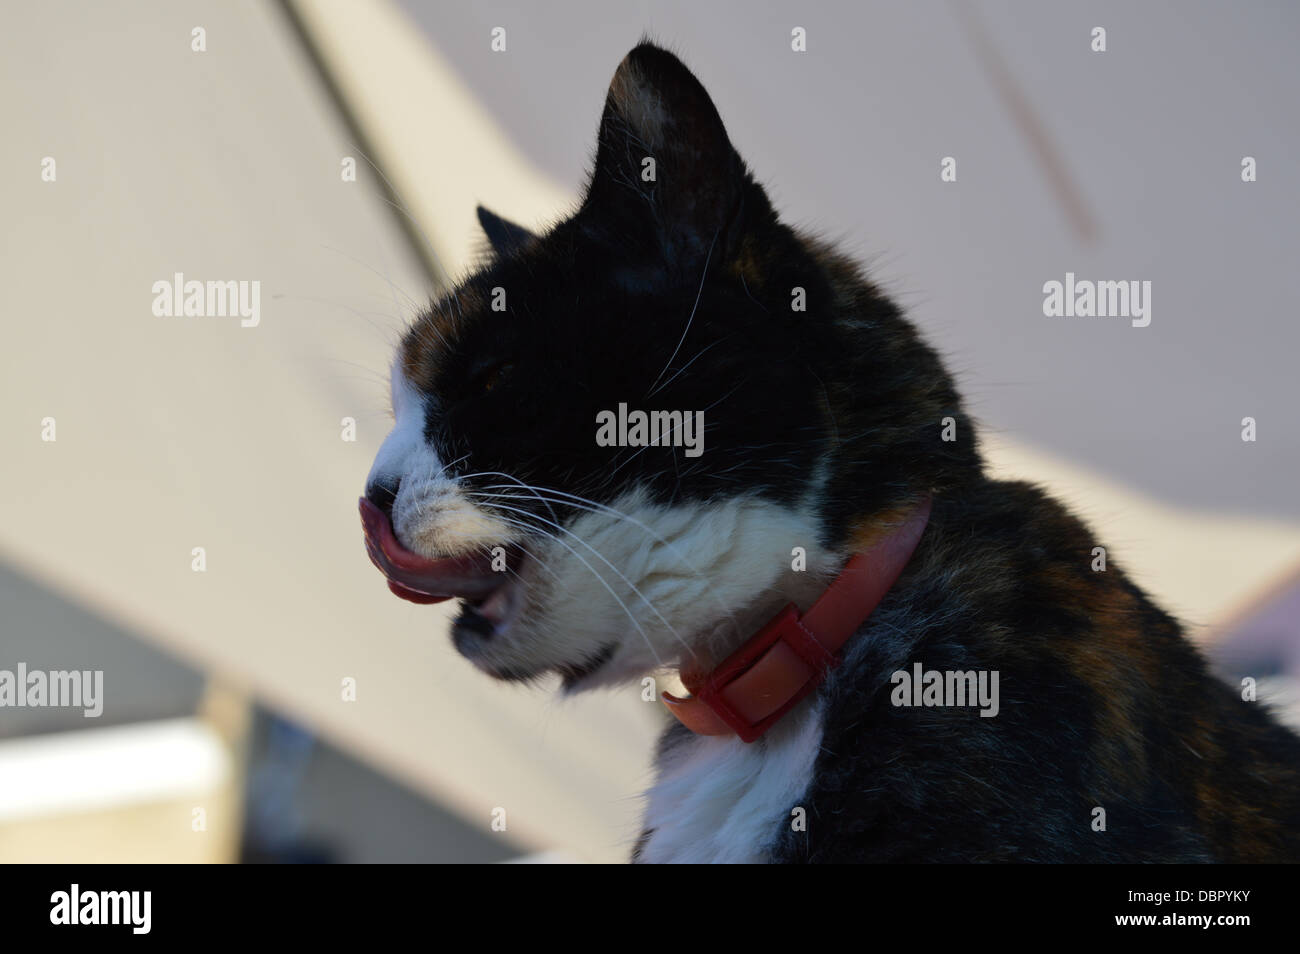 a cat licking her nose and mouth Stock Photo